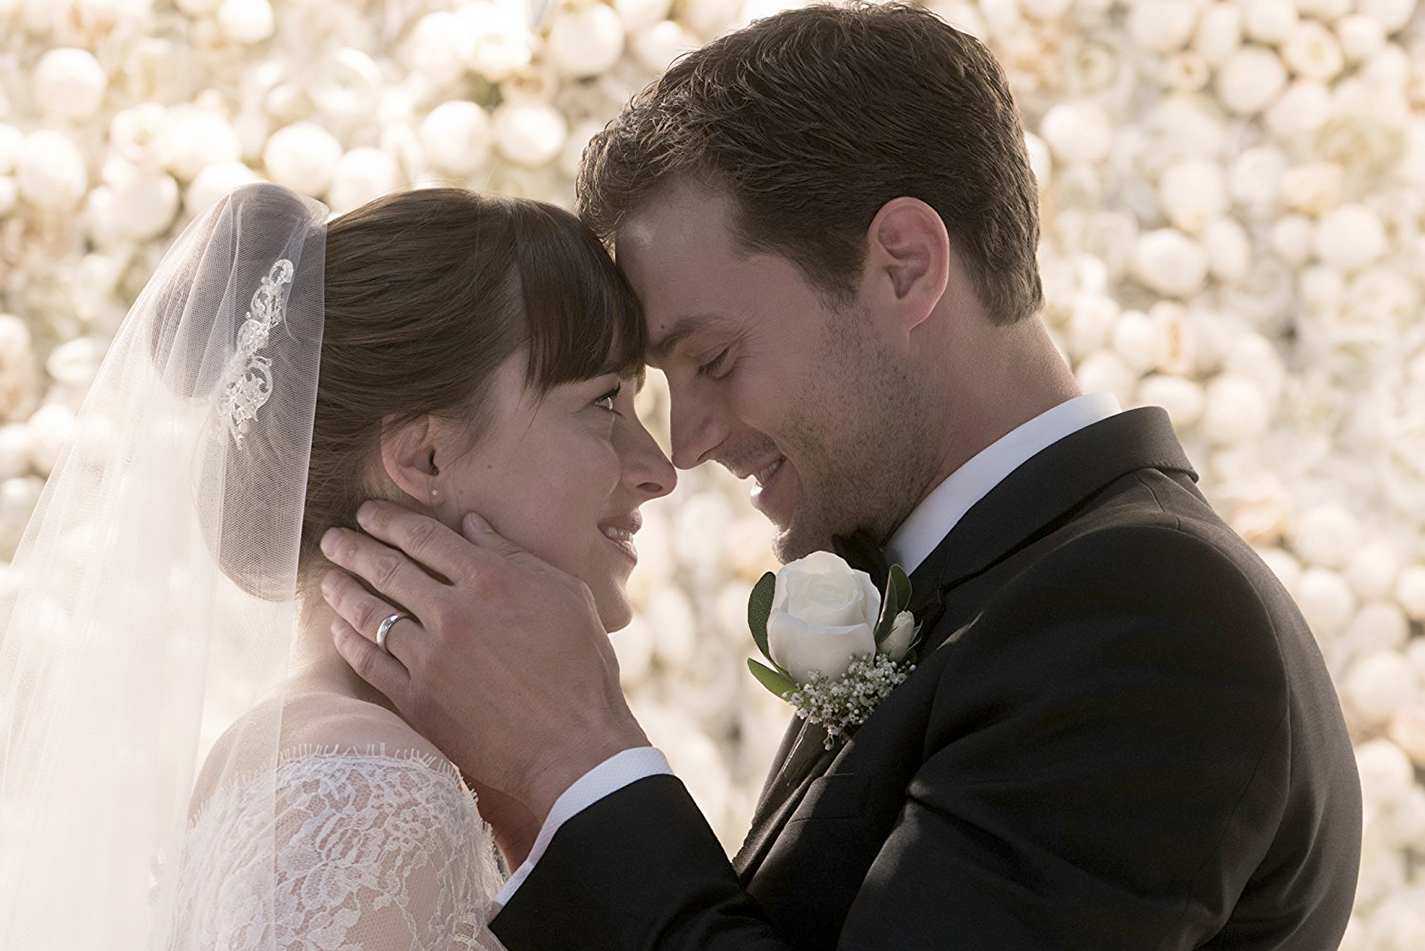 Anastasia Steele (Dakota Johnson) and Christian Grey (Jamie Dornan) tie the knot in the third film of the Fifty Shades series. This film wraps up the trilogy that brought BDSM to the big screen and snagged mainstream attention.